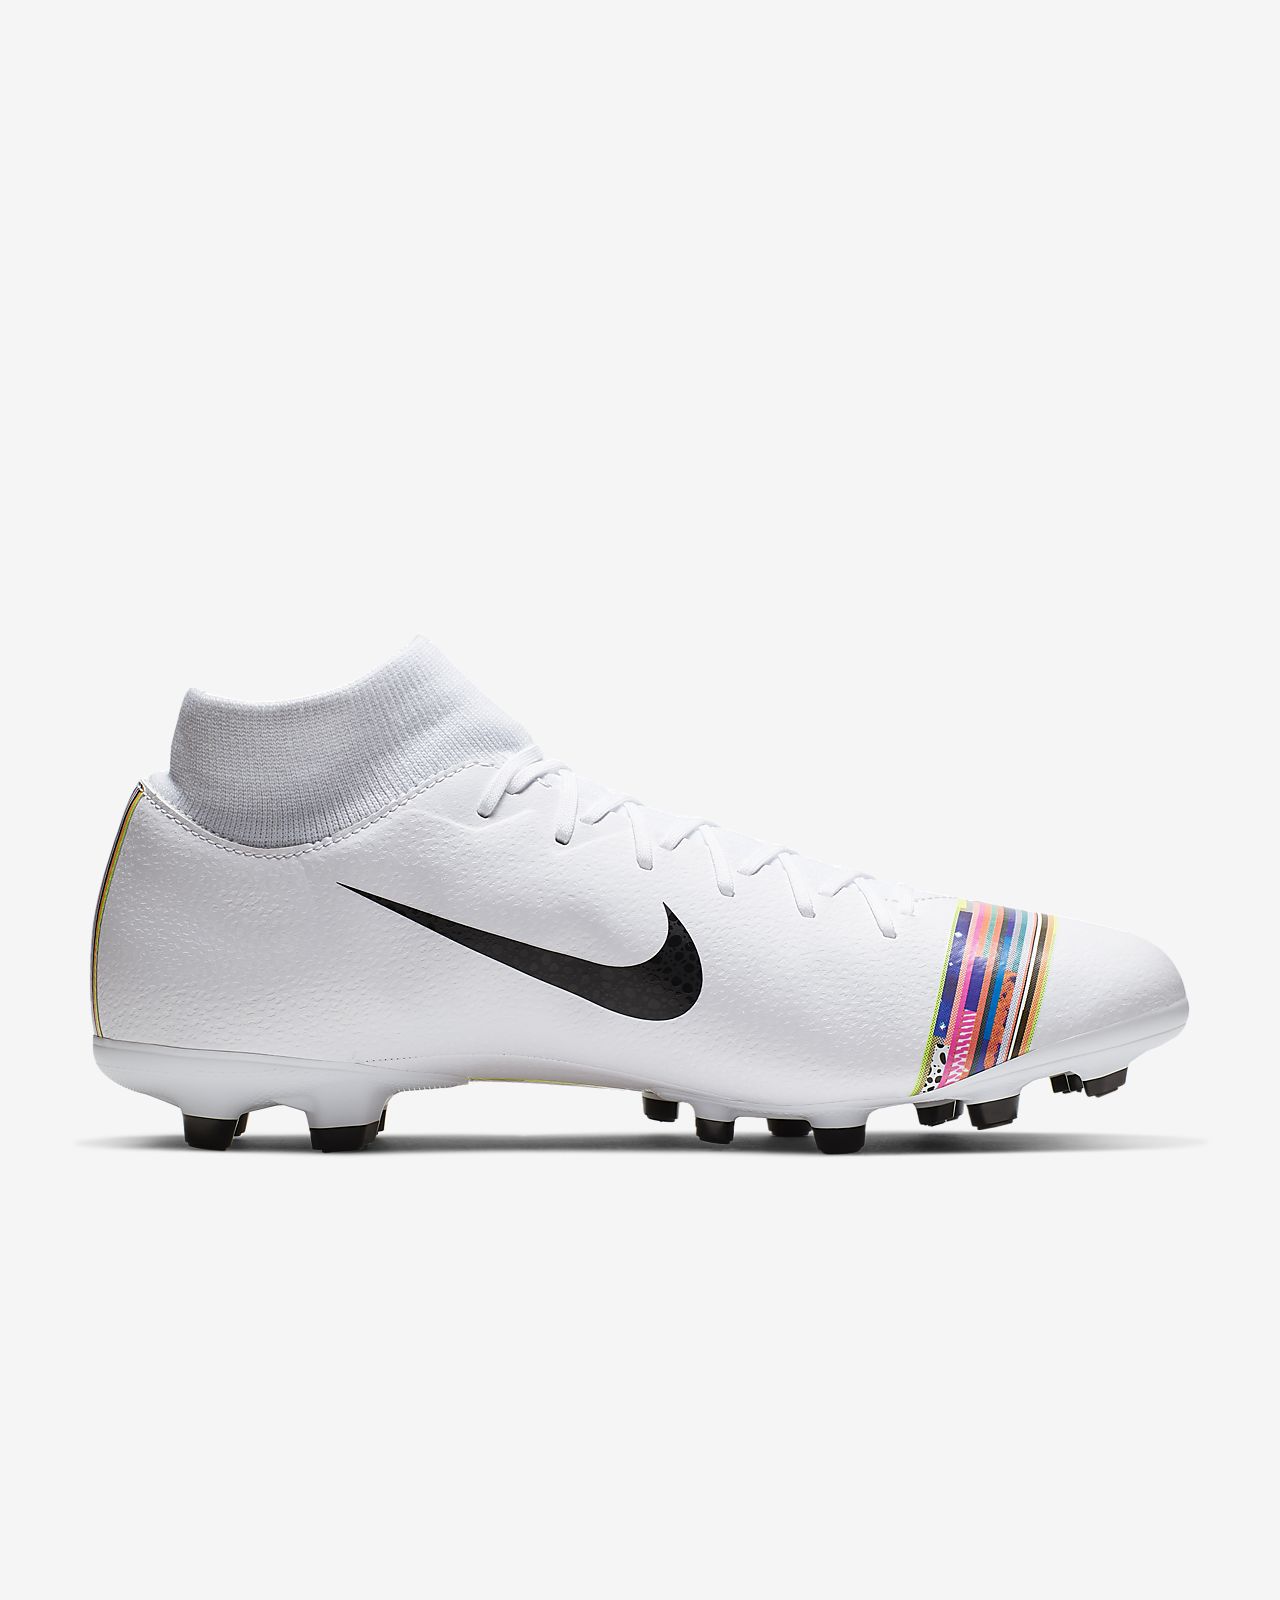 NIKE Men 's soccer shoes for all races' Superfly 6.